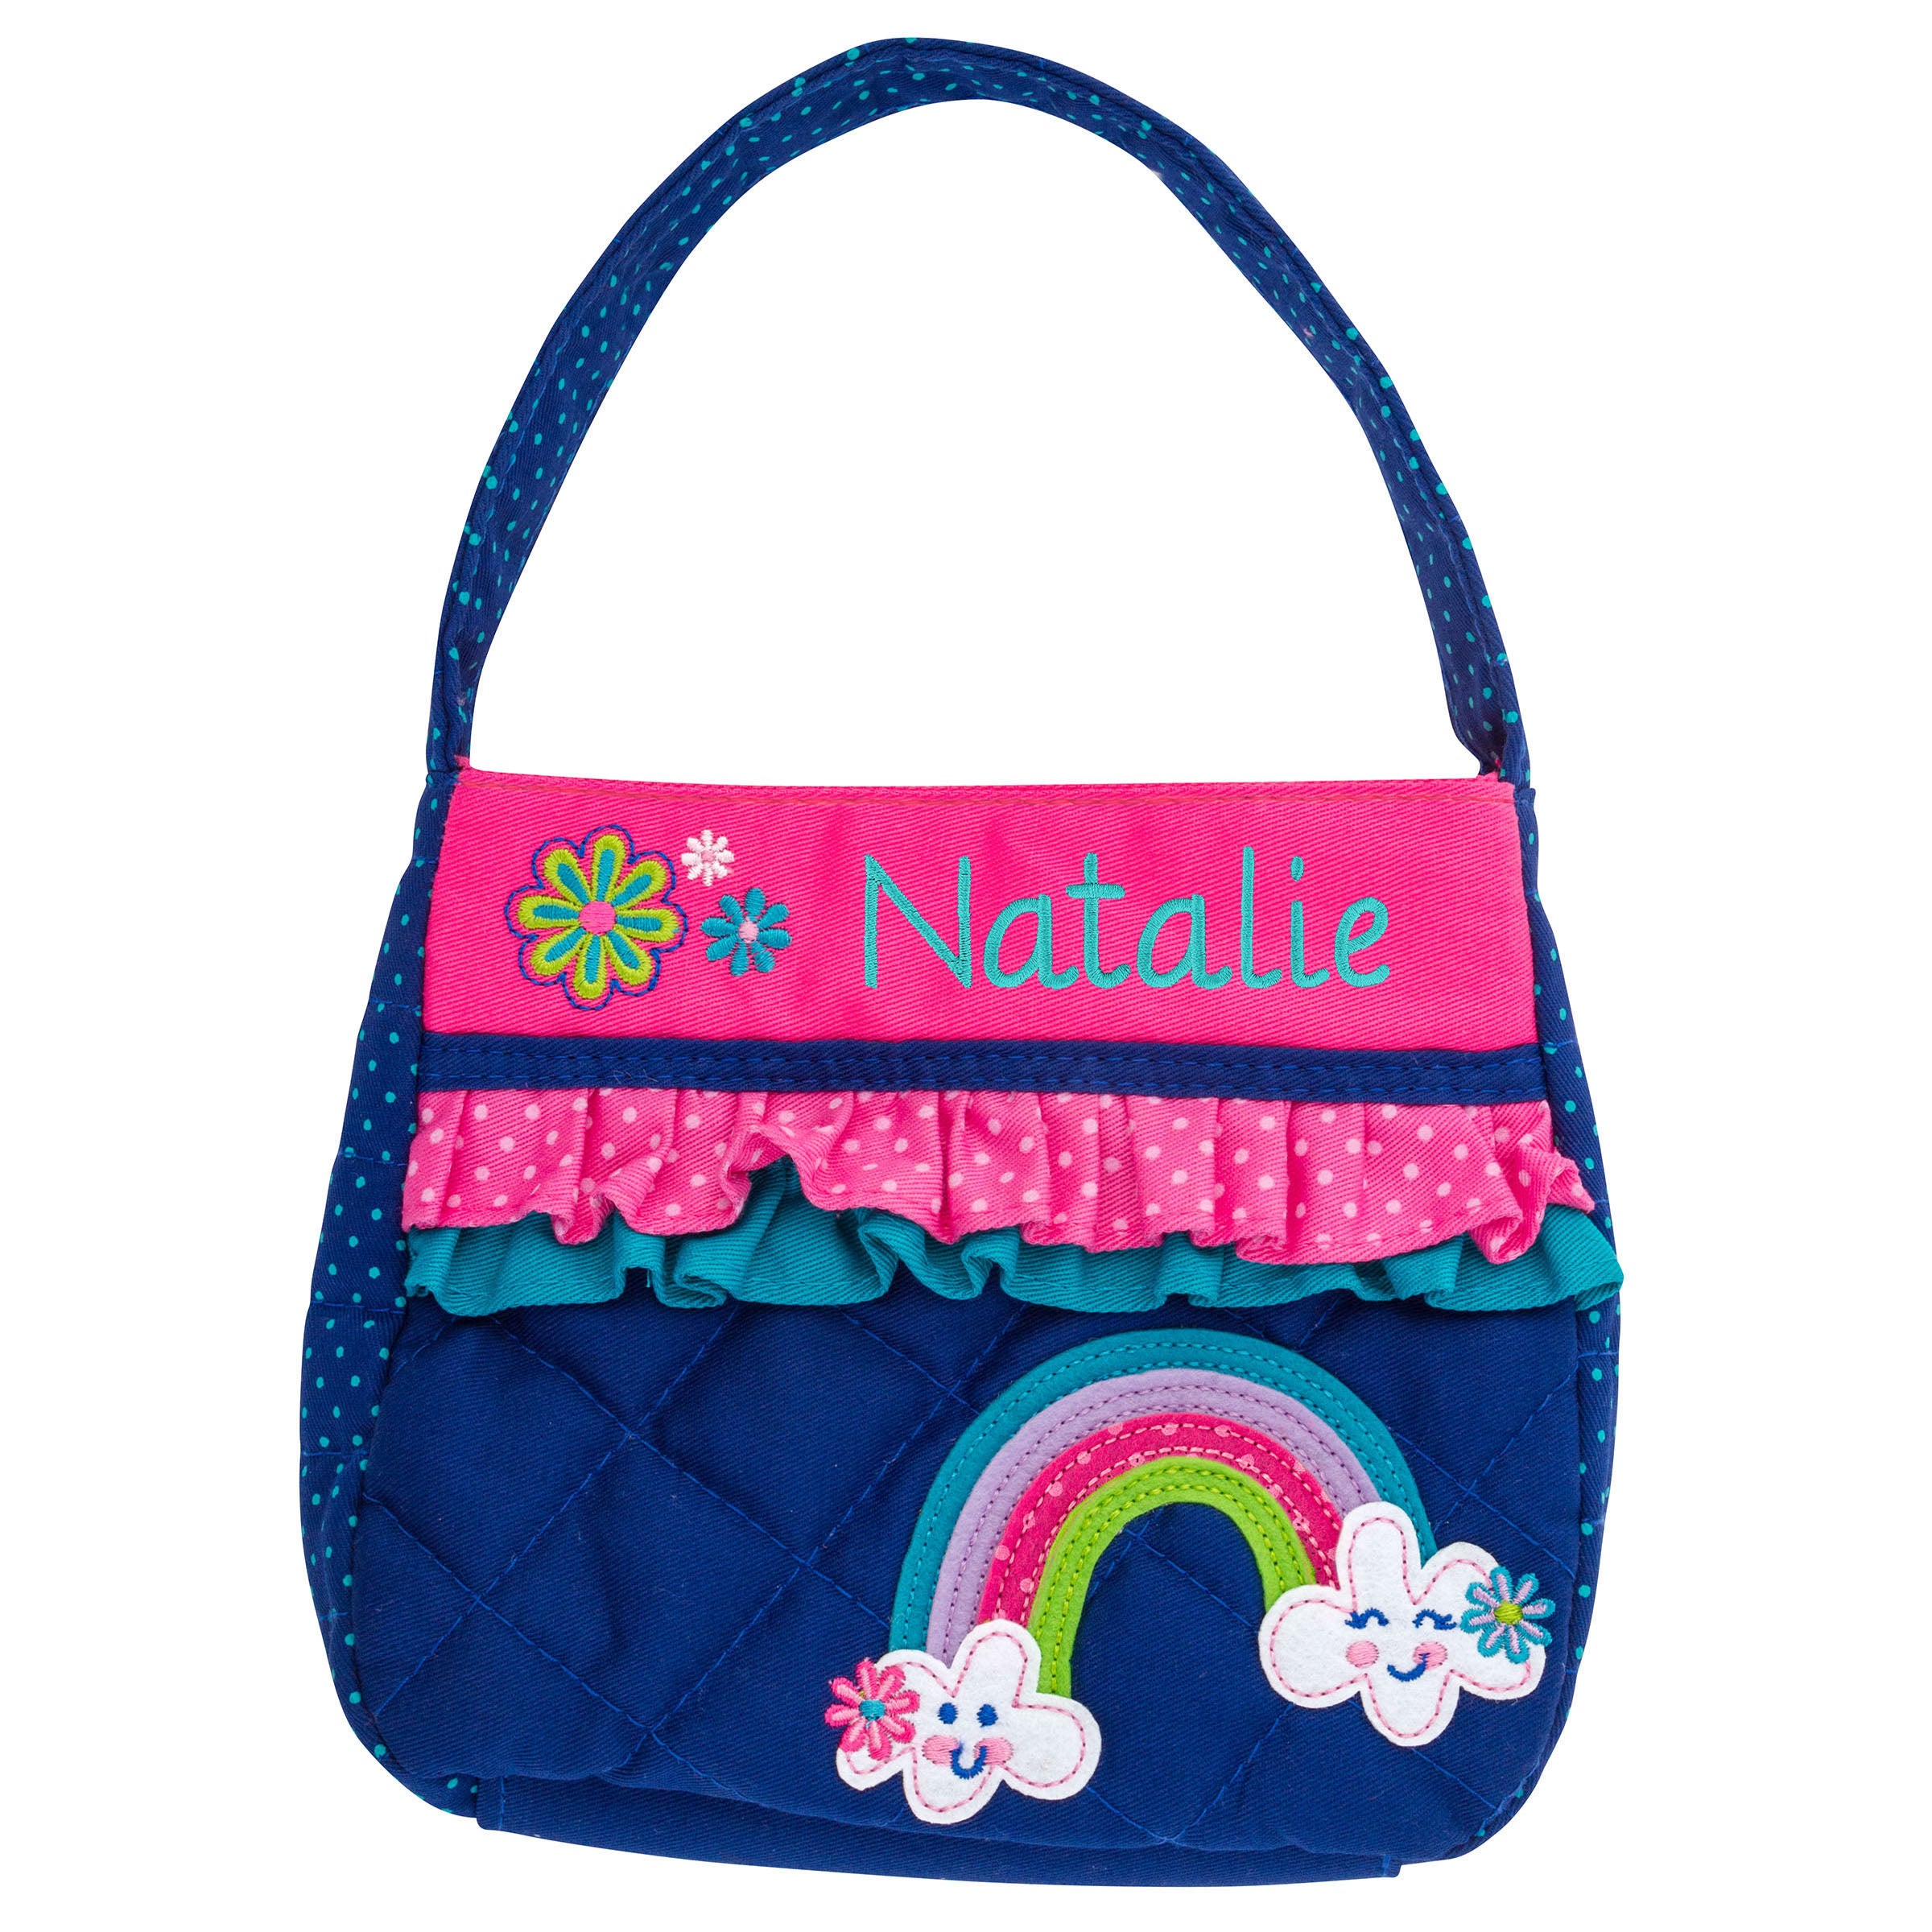 Personalized Overnighter Duffle Bags for Kids - 26 Colors – Marietta  Monograms & Embroidery